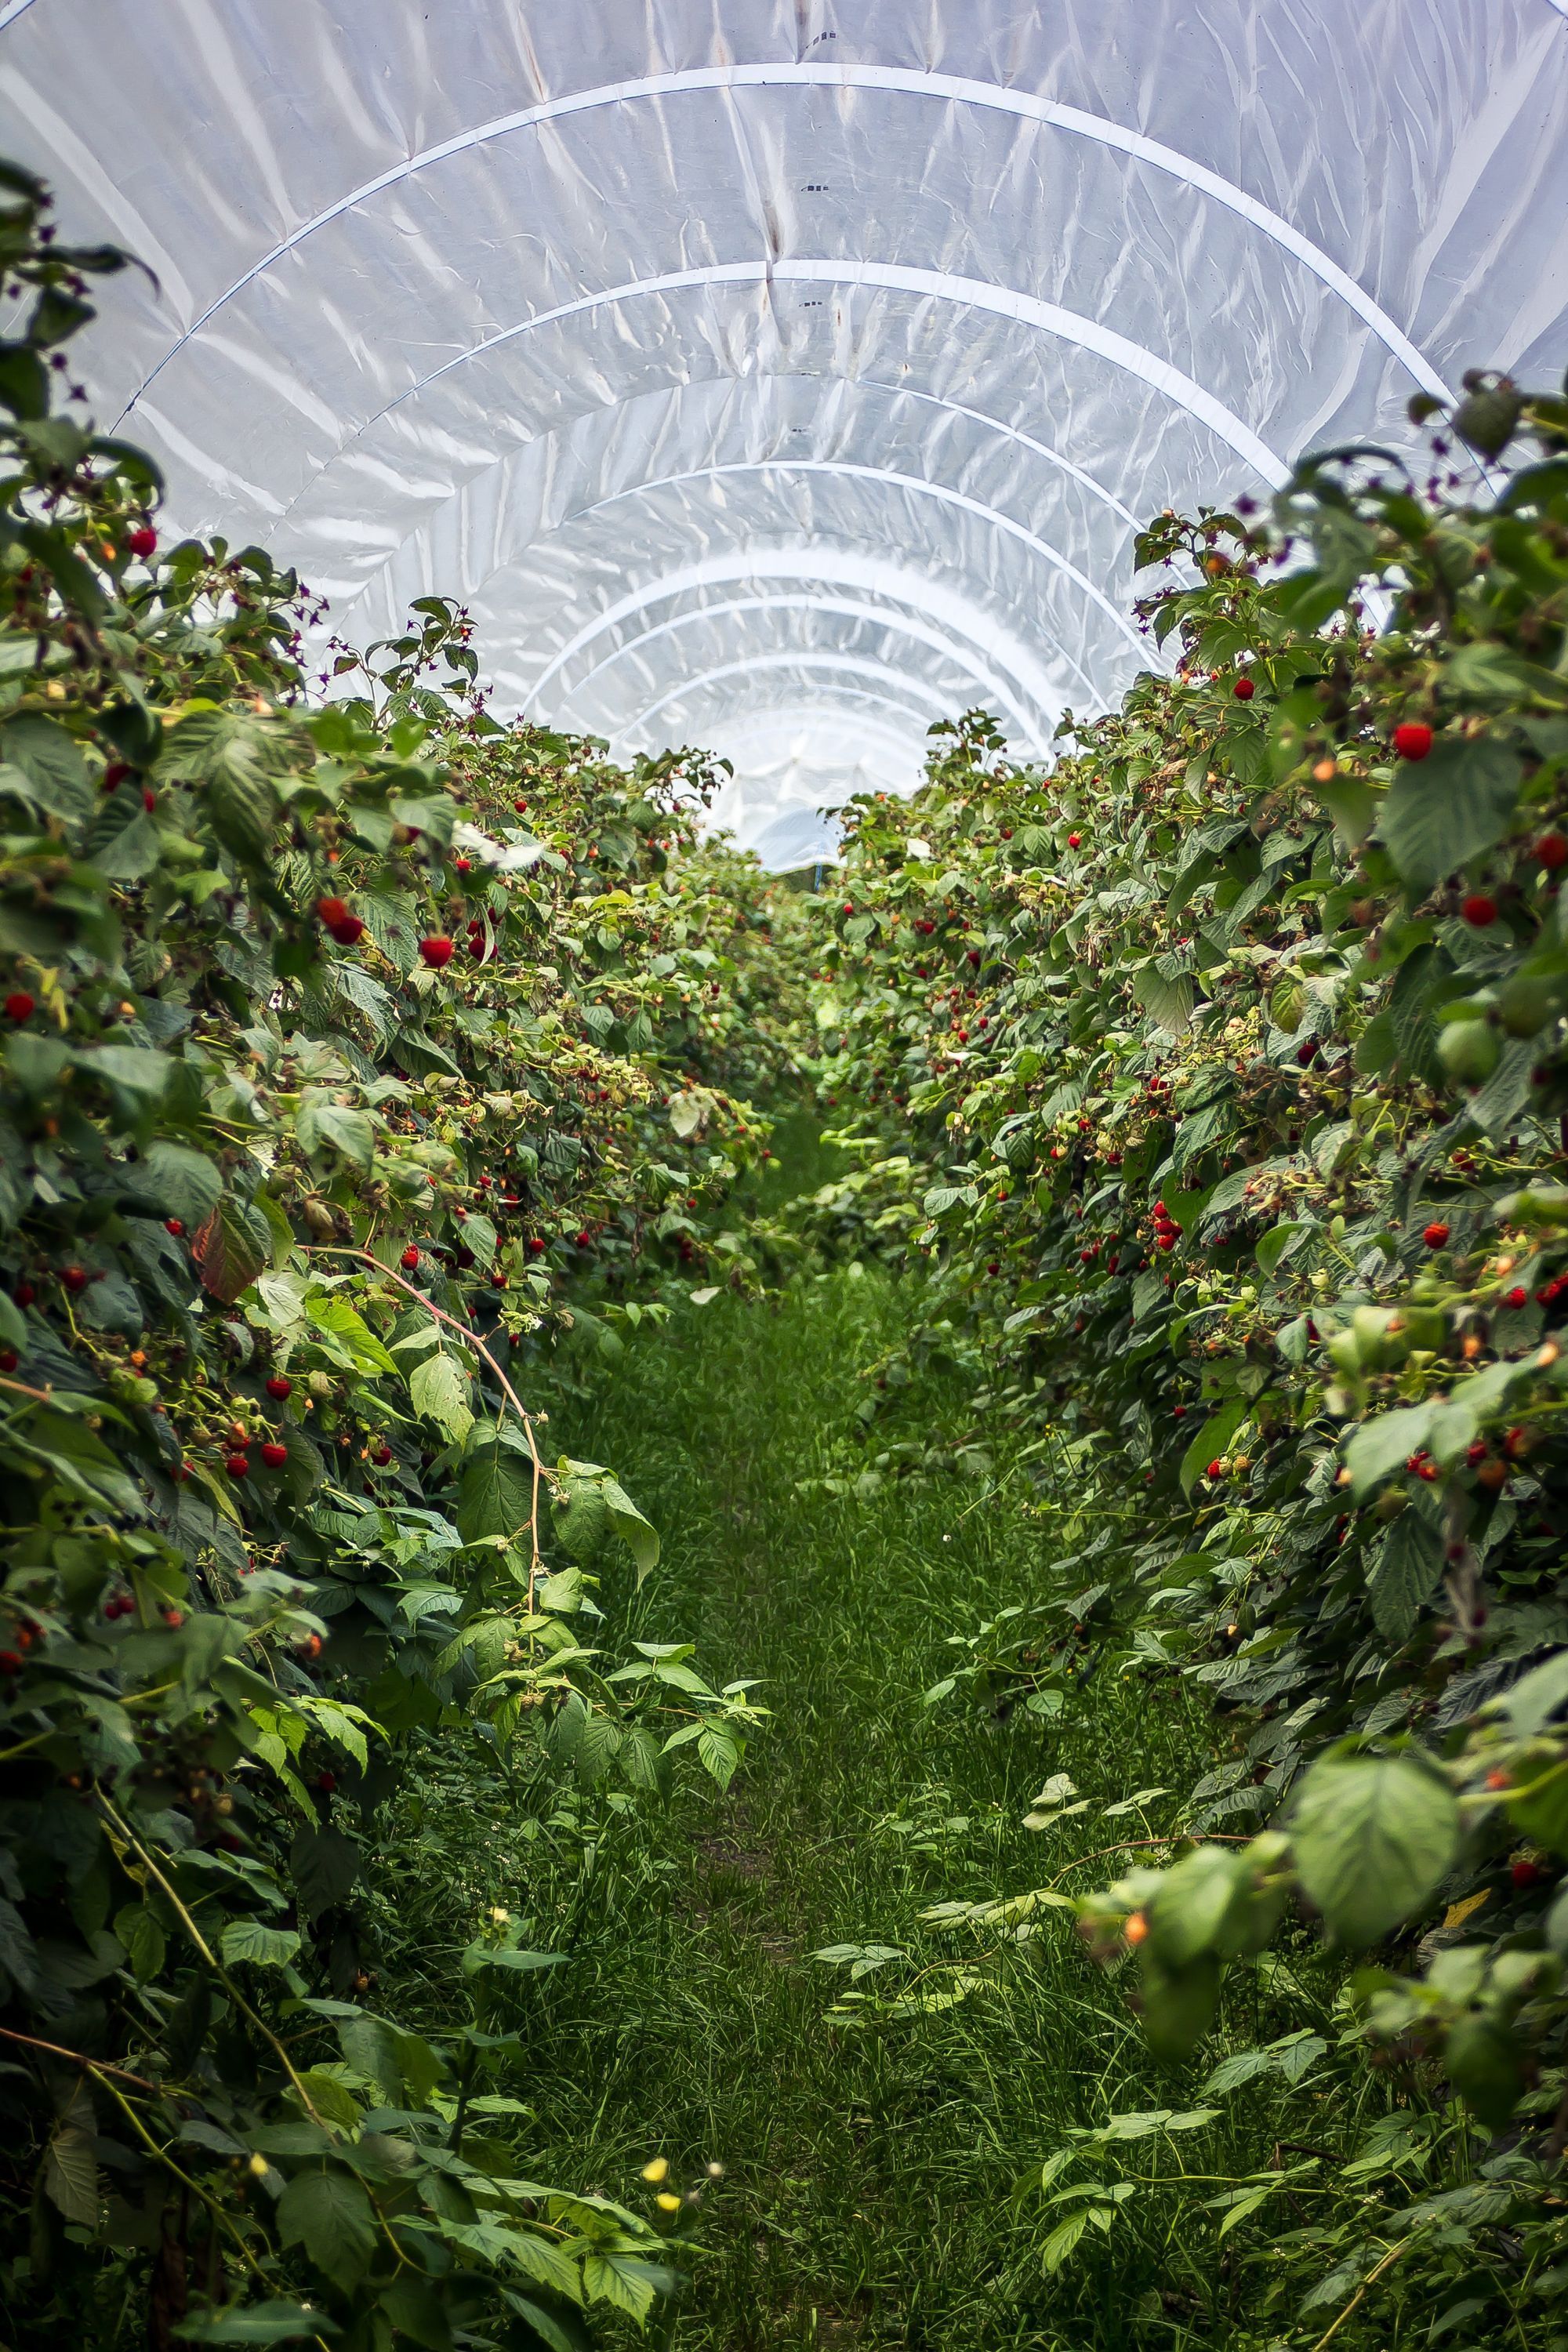 🍅 Technology from TV sets gives greater harvests in greenhouses